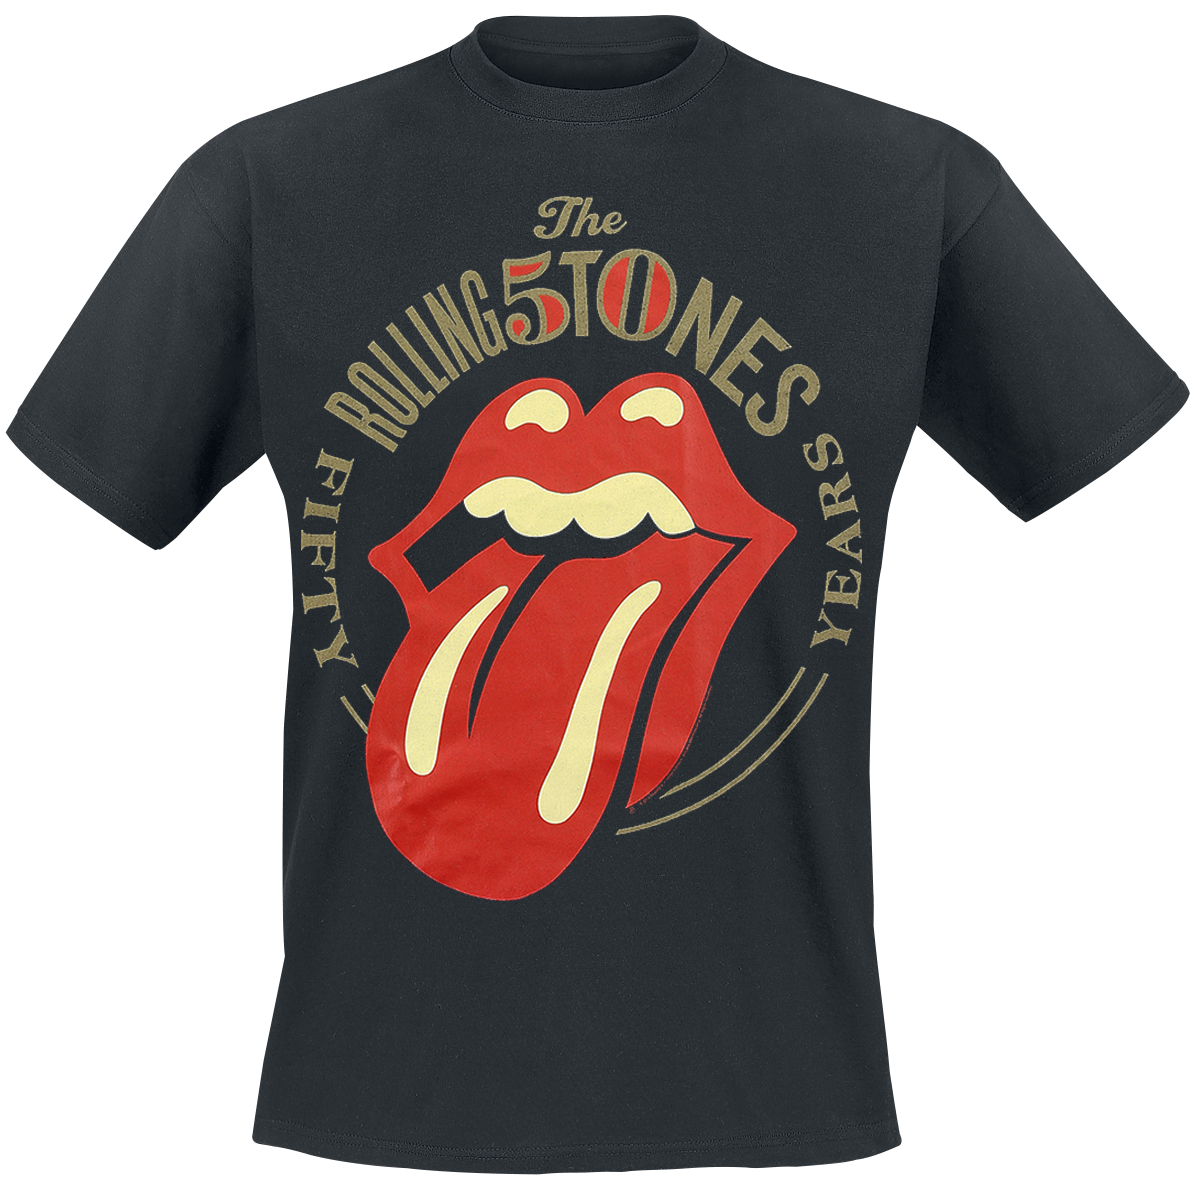 The Rolling Stones - 50 Years - T-Shirt - schwarz